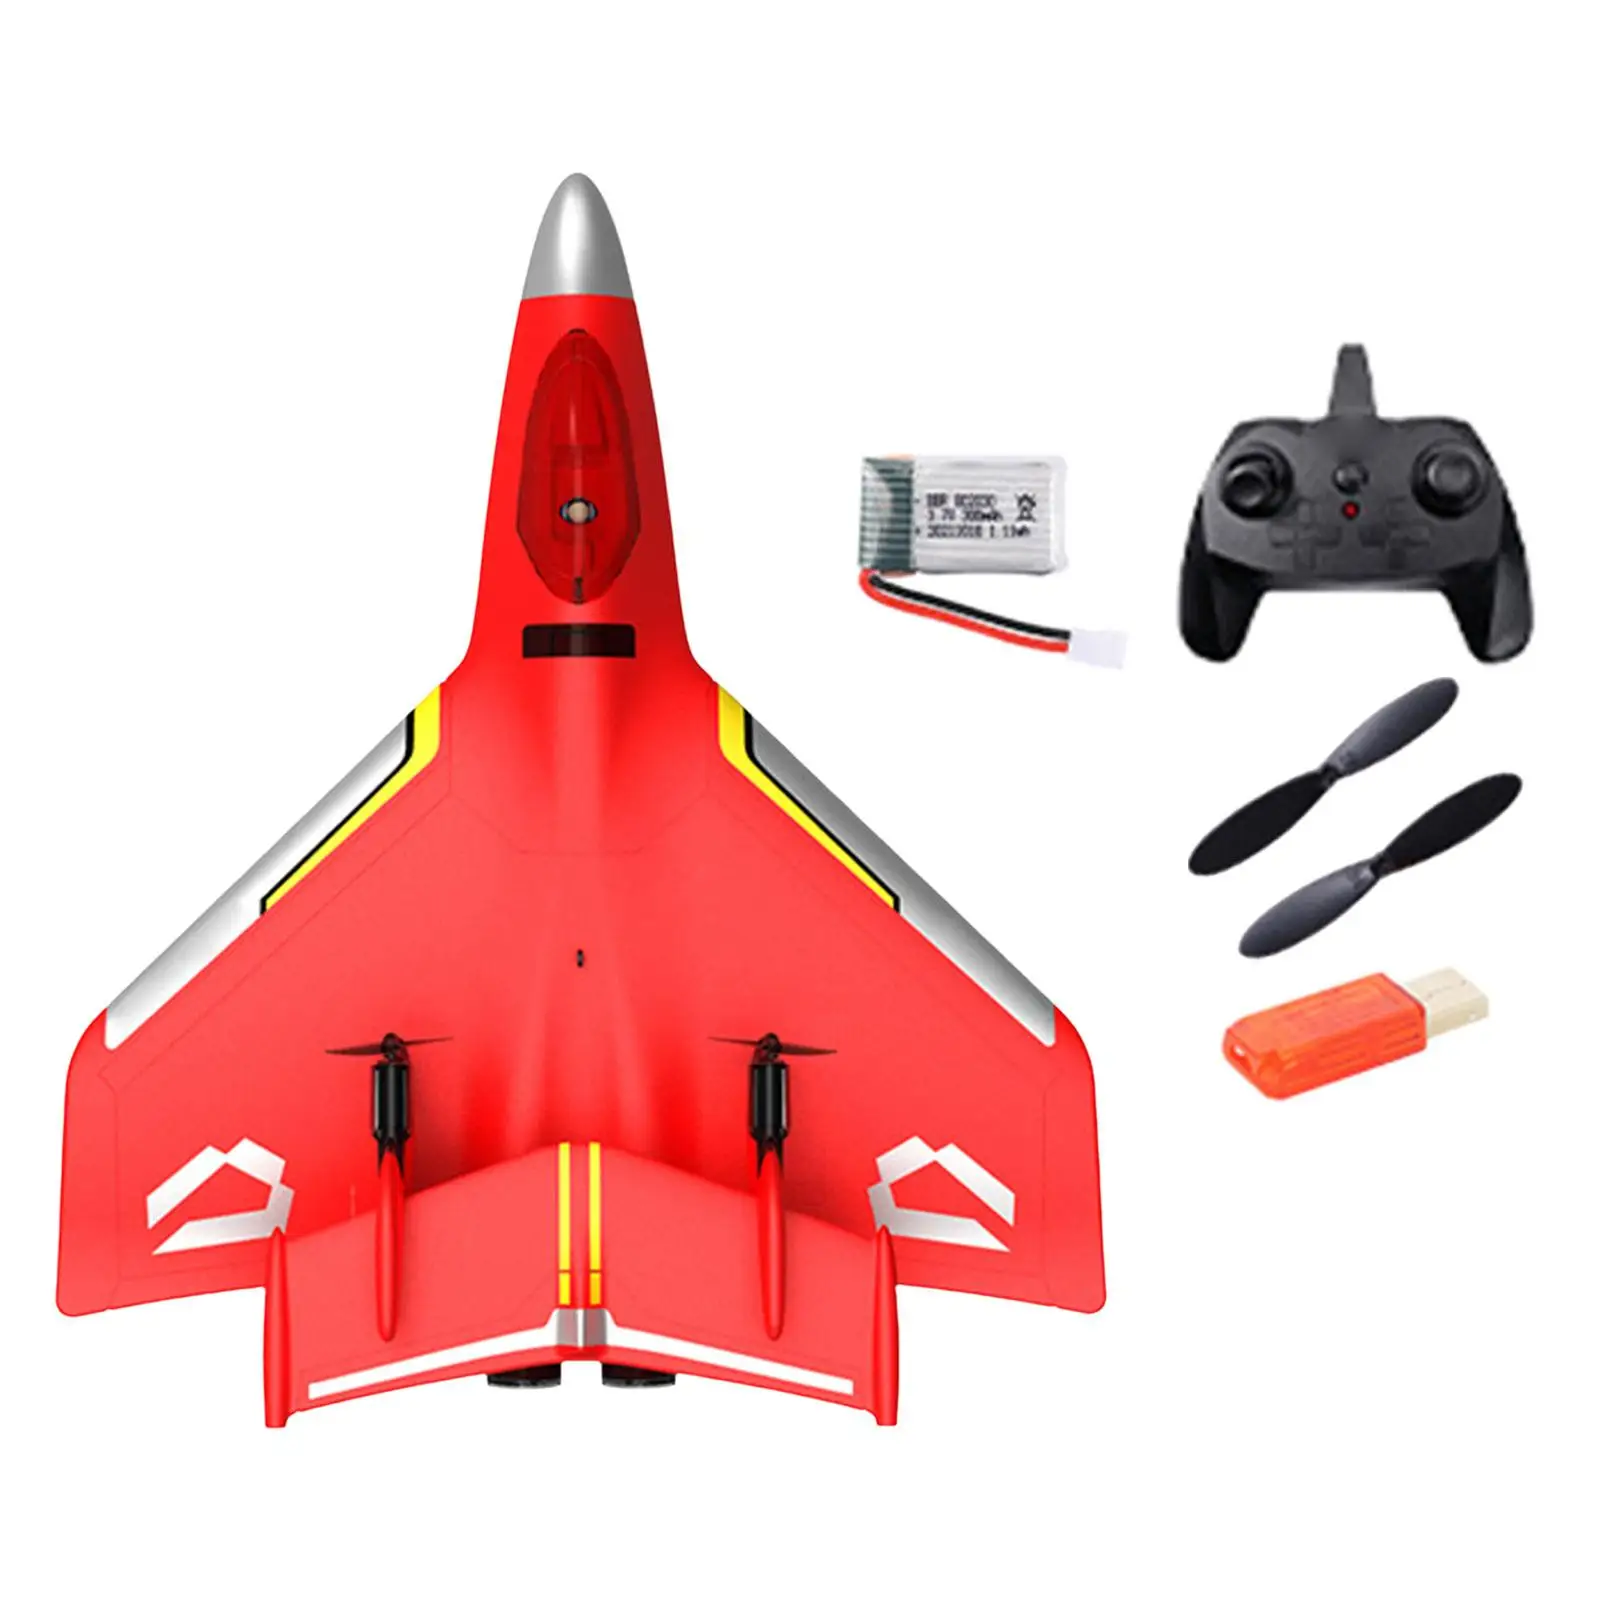 RC Airplane 2.4GHz Lightweight Stable Easy to Control Remote Control Airplane Foam RC Airplane RC Glider for Boys Girls Kids